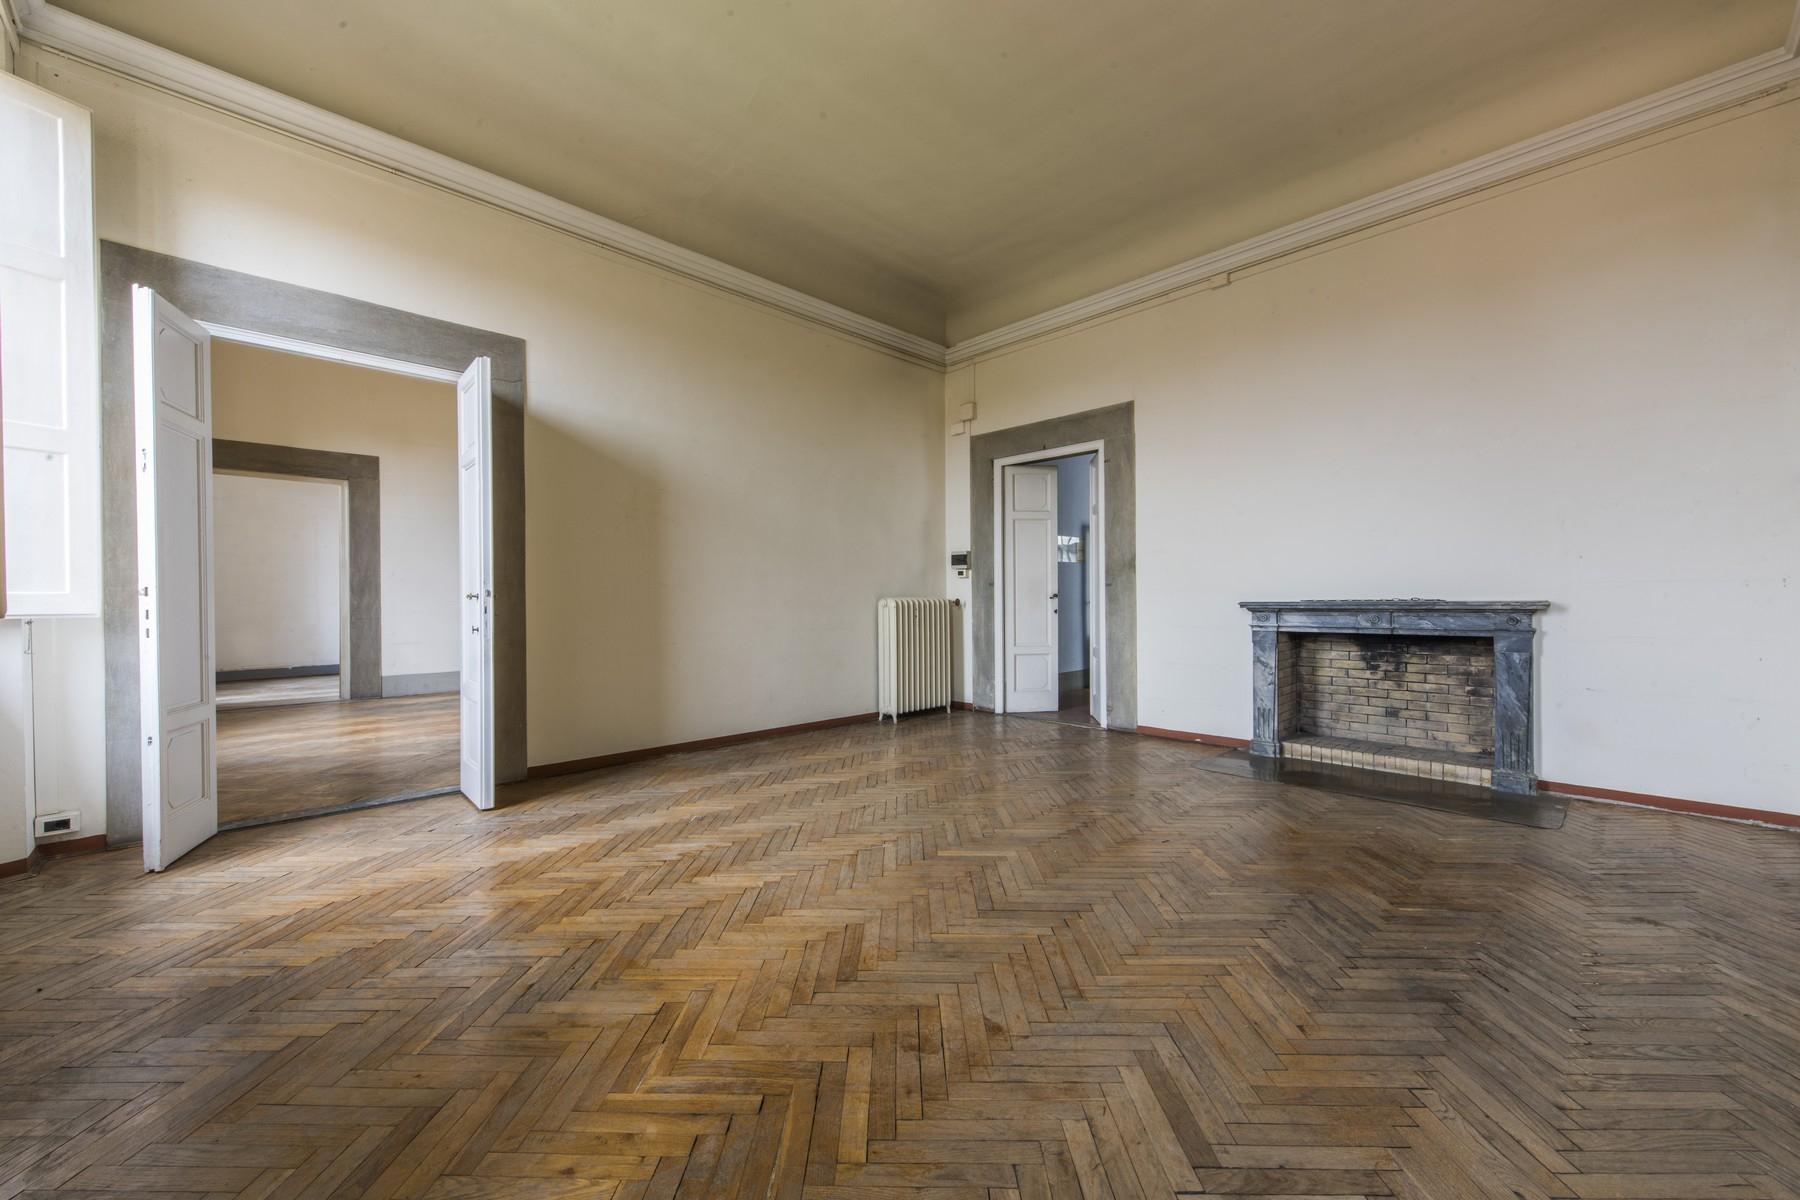 Magnificent 520sqm penthouse in a historic Florentine palazzo. - 5